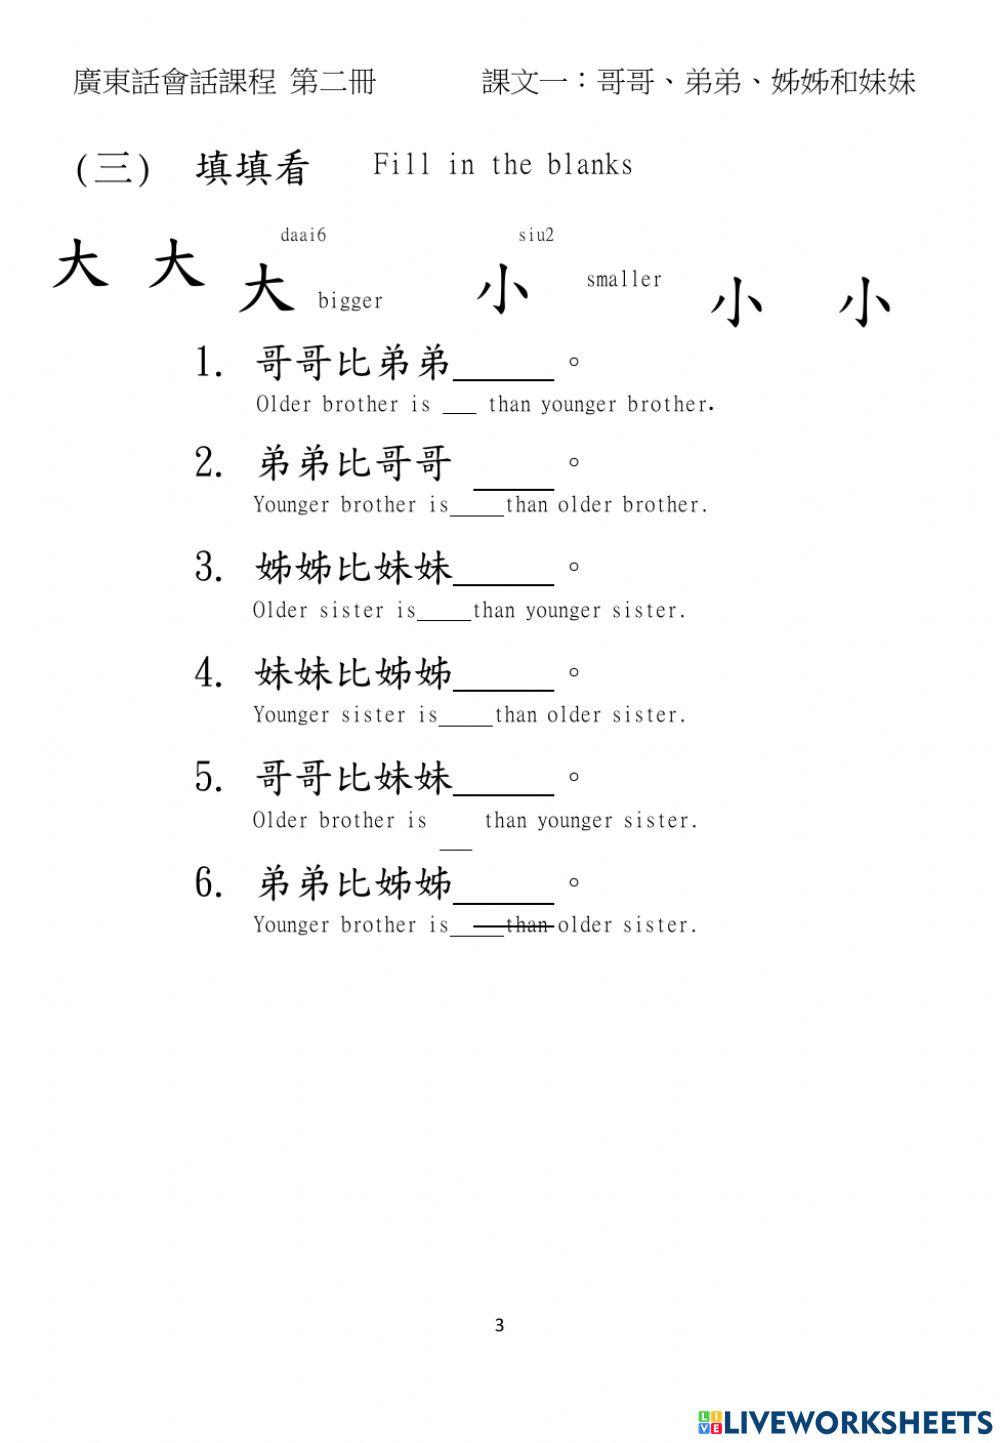 Mon sheong chinese school C2 page 1-3